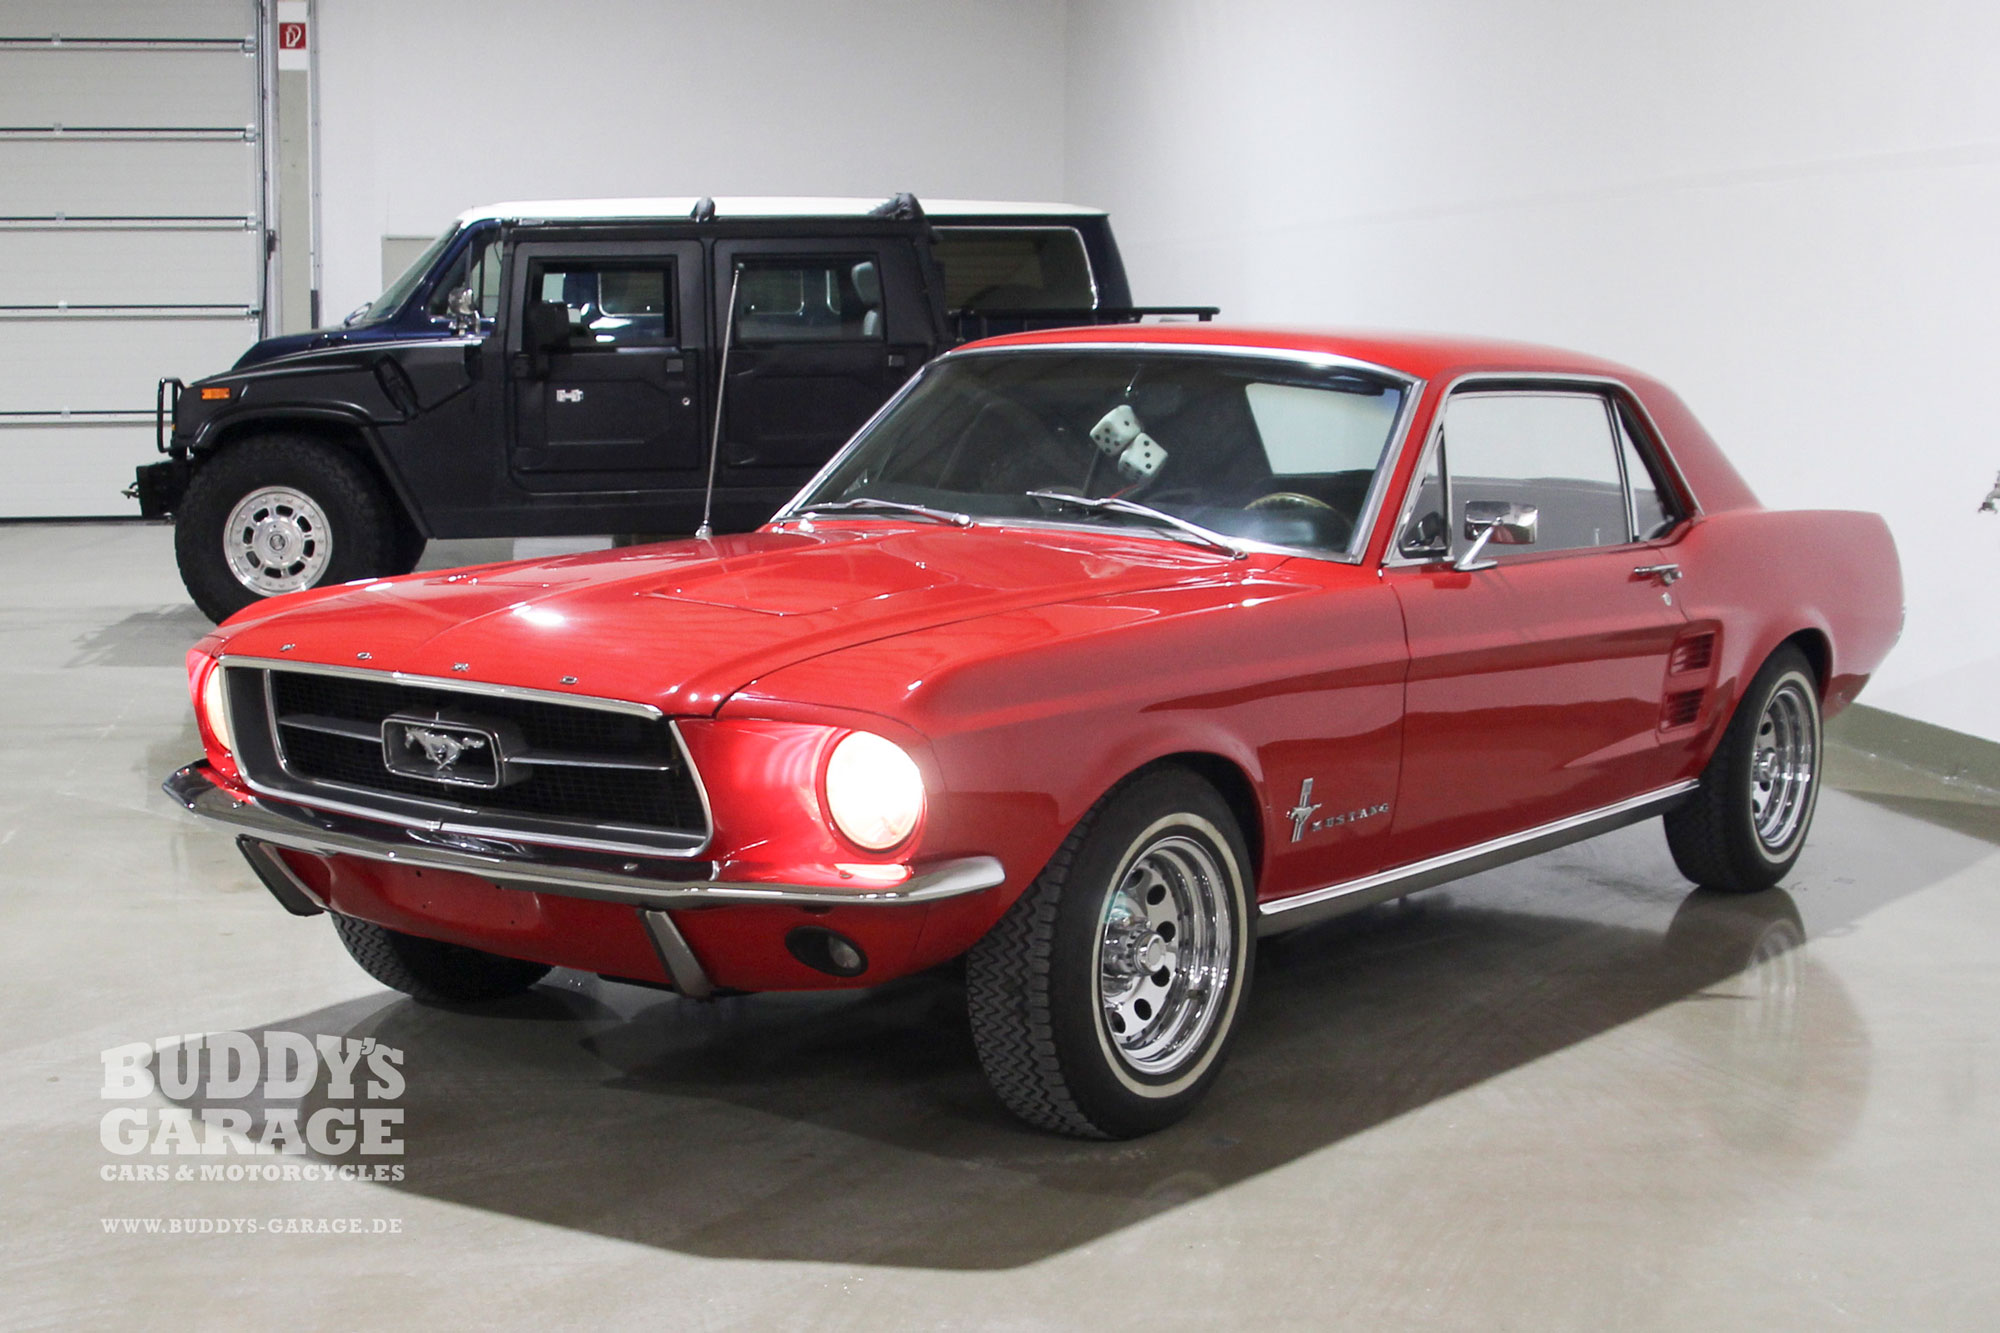 Ford Mustang 1967 rot Candy Apple Red | Buddy's Garage Bad Oeynhausen